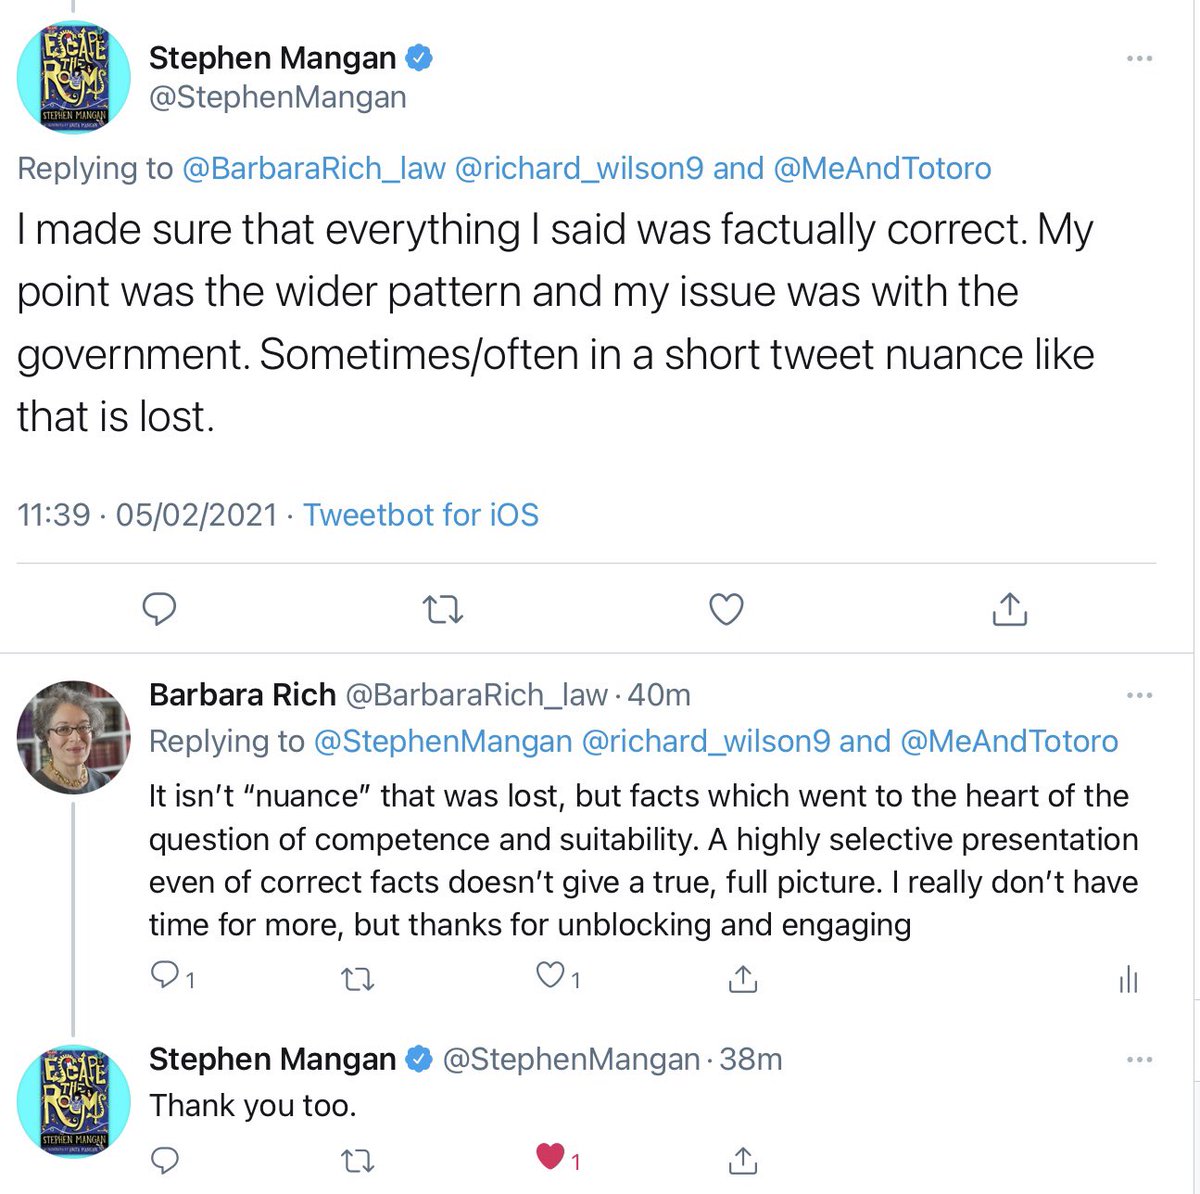 It’s only fair to say that Stephen Mangan did delete his tweet, unblock me, and discuss it civilly